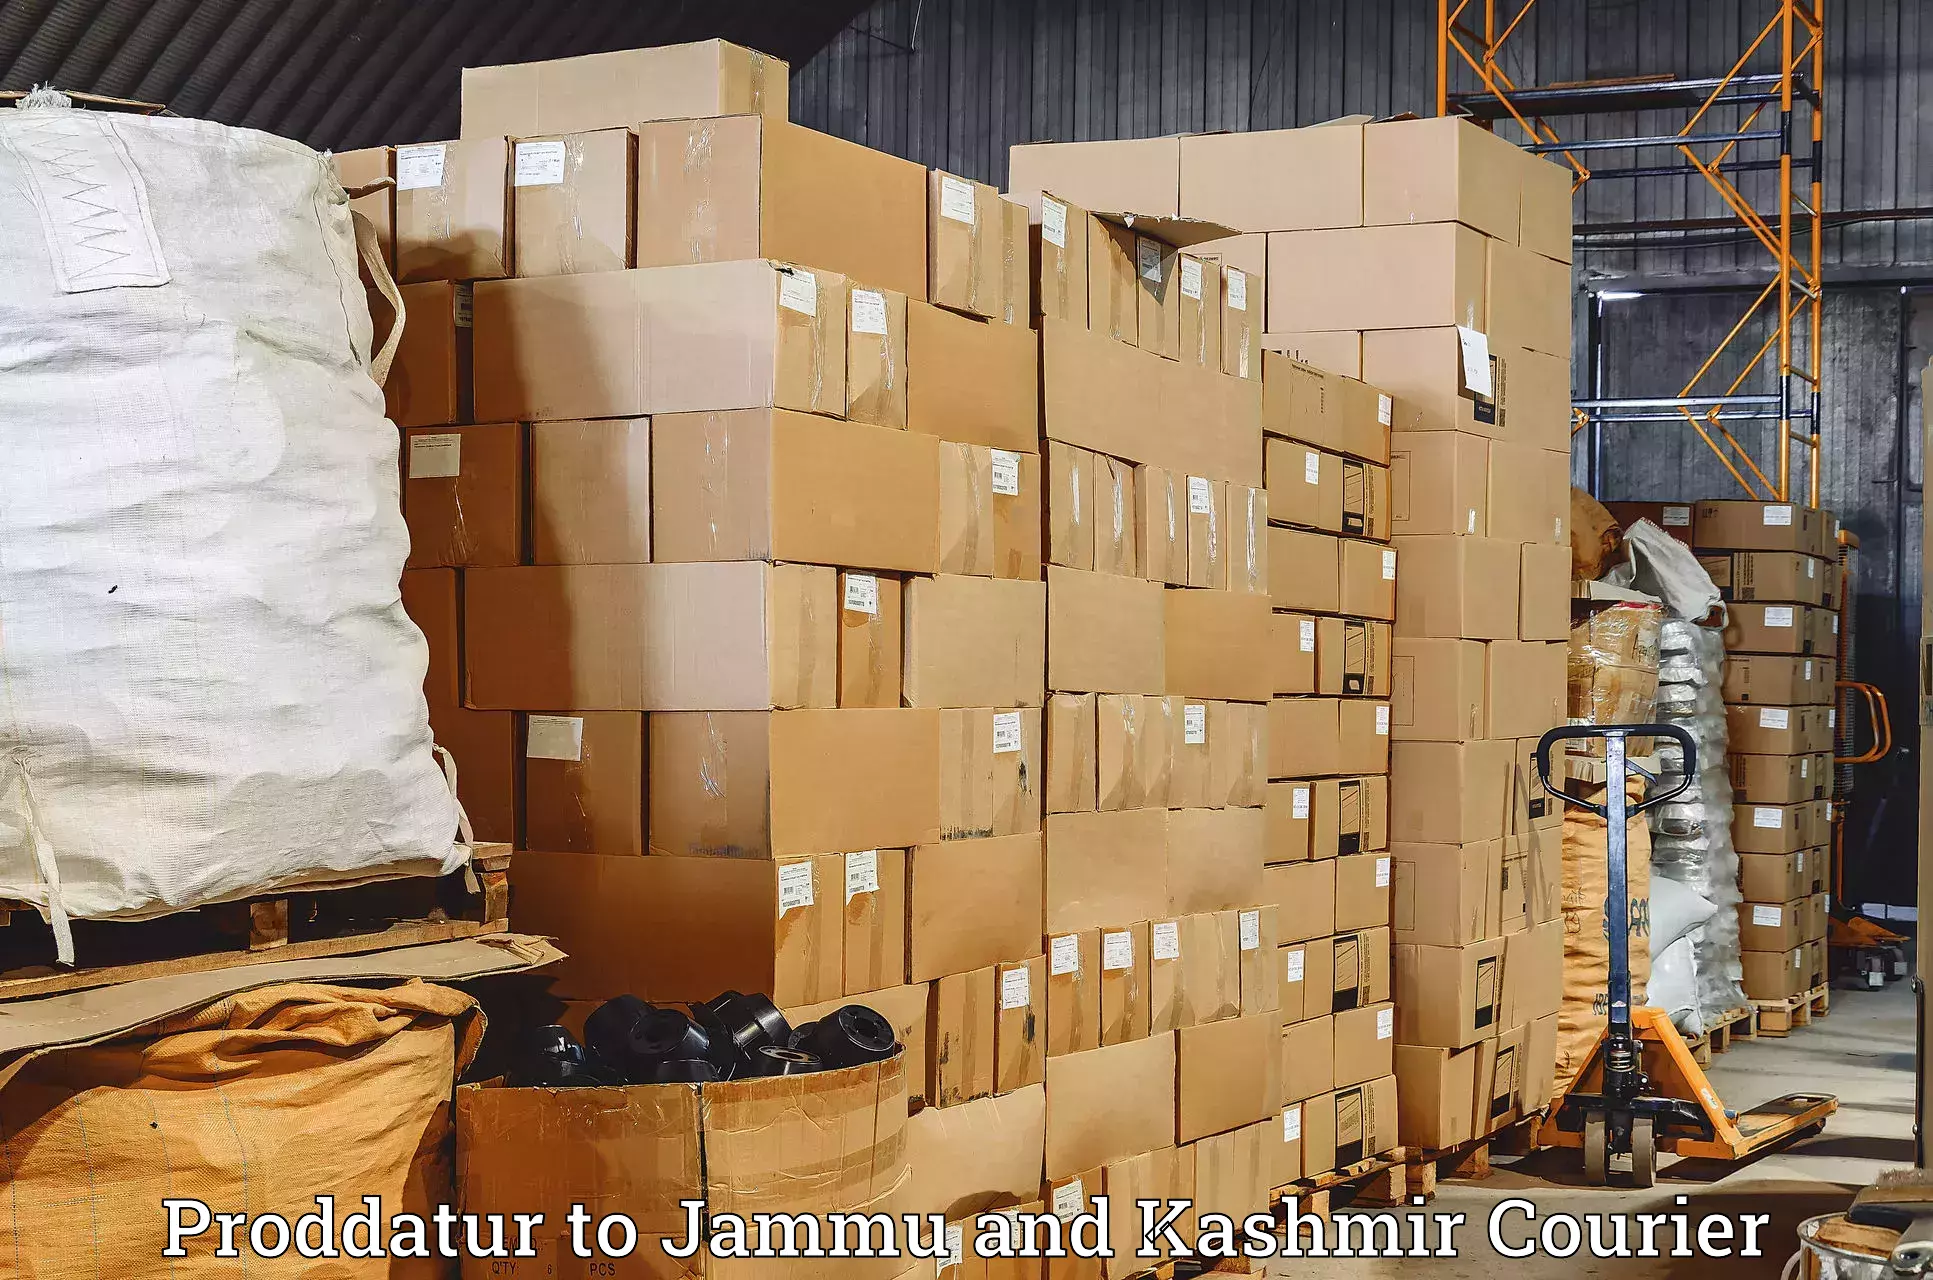 Express delivery solutions Proddatur to Kulgam